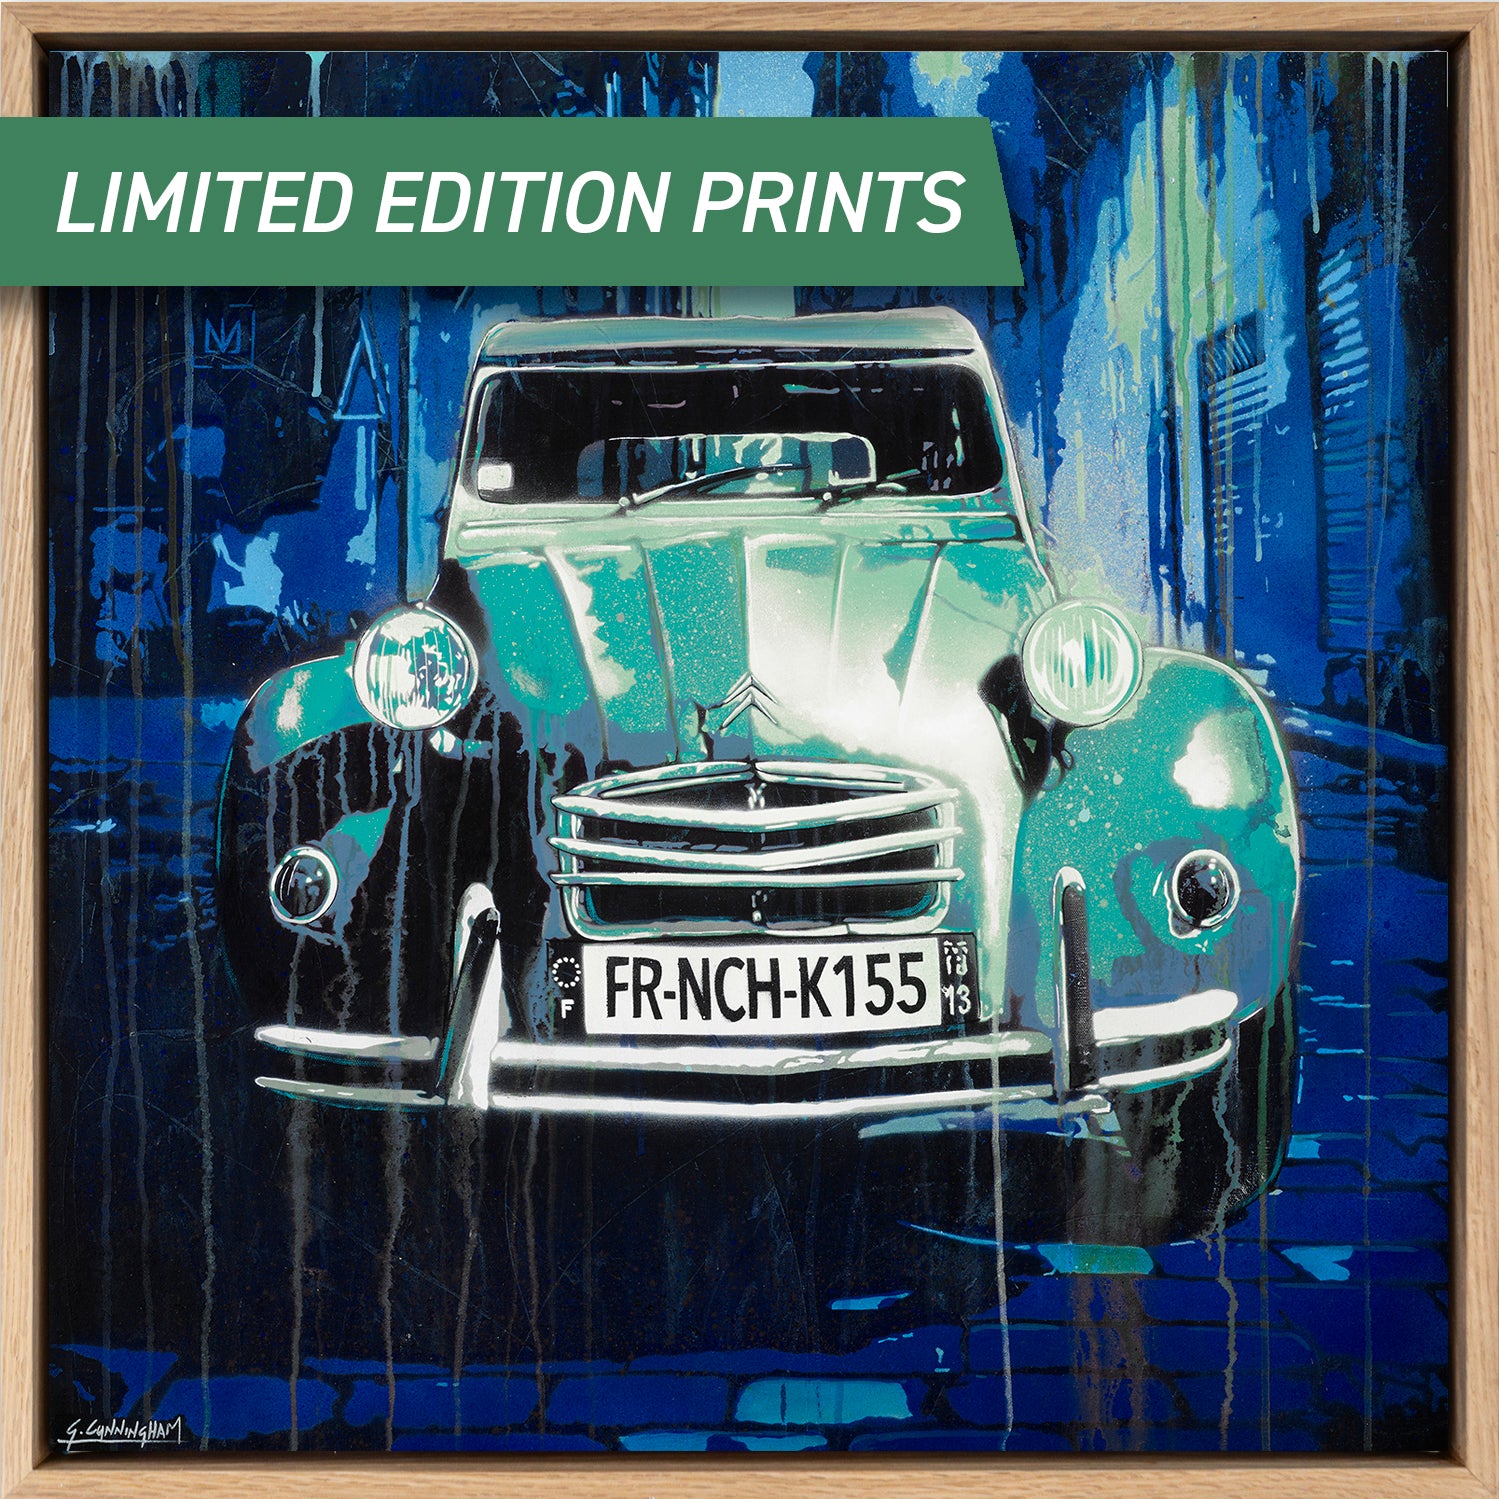 Limited Edition Prints